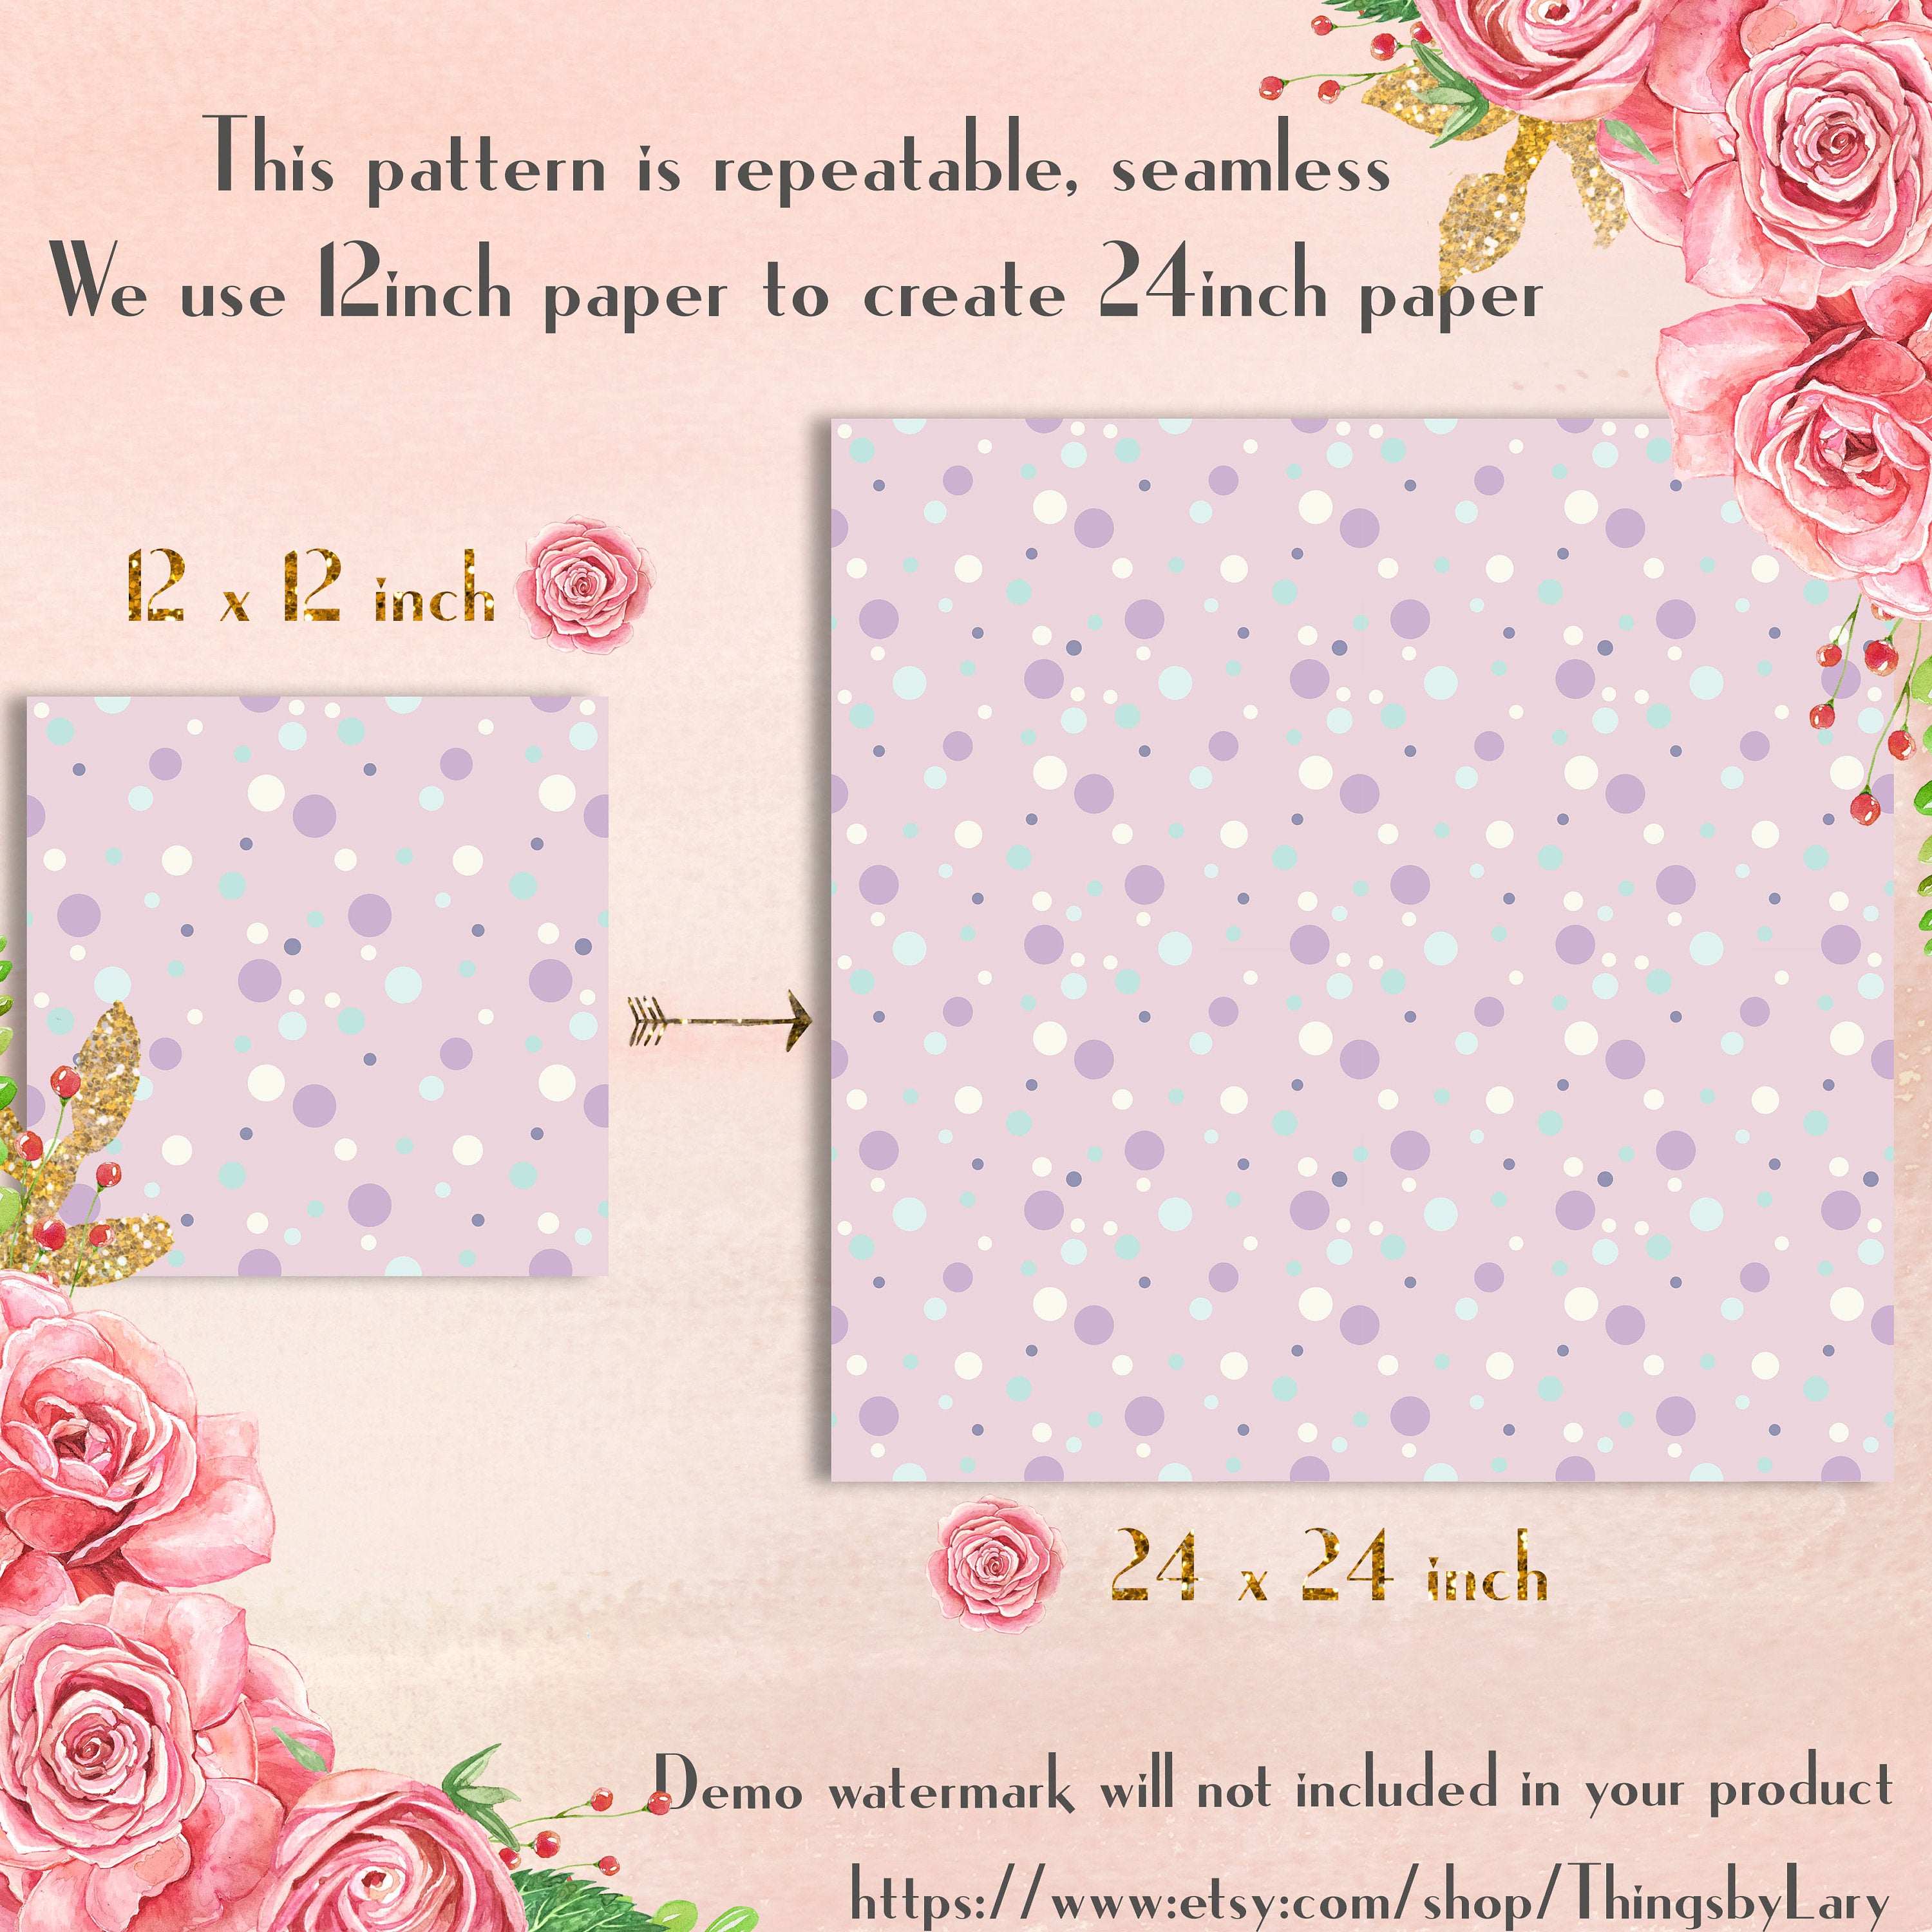 18 Seamless Pastel Polka Dot Digital Papers 12inch 300 dpi commercial use instant download, Spring Summer Pastel Wedding Shabby chic sweet